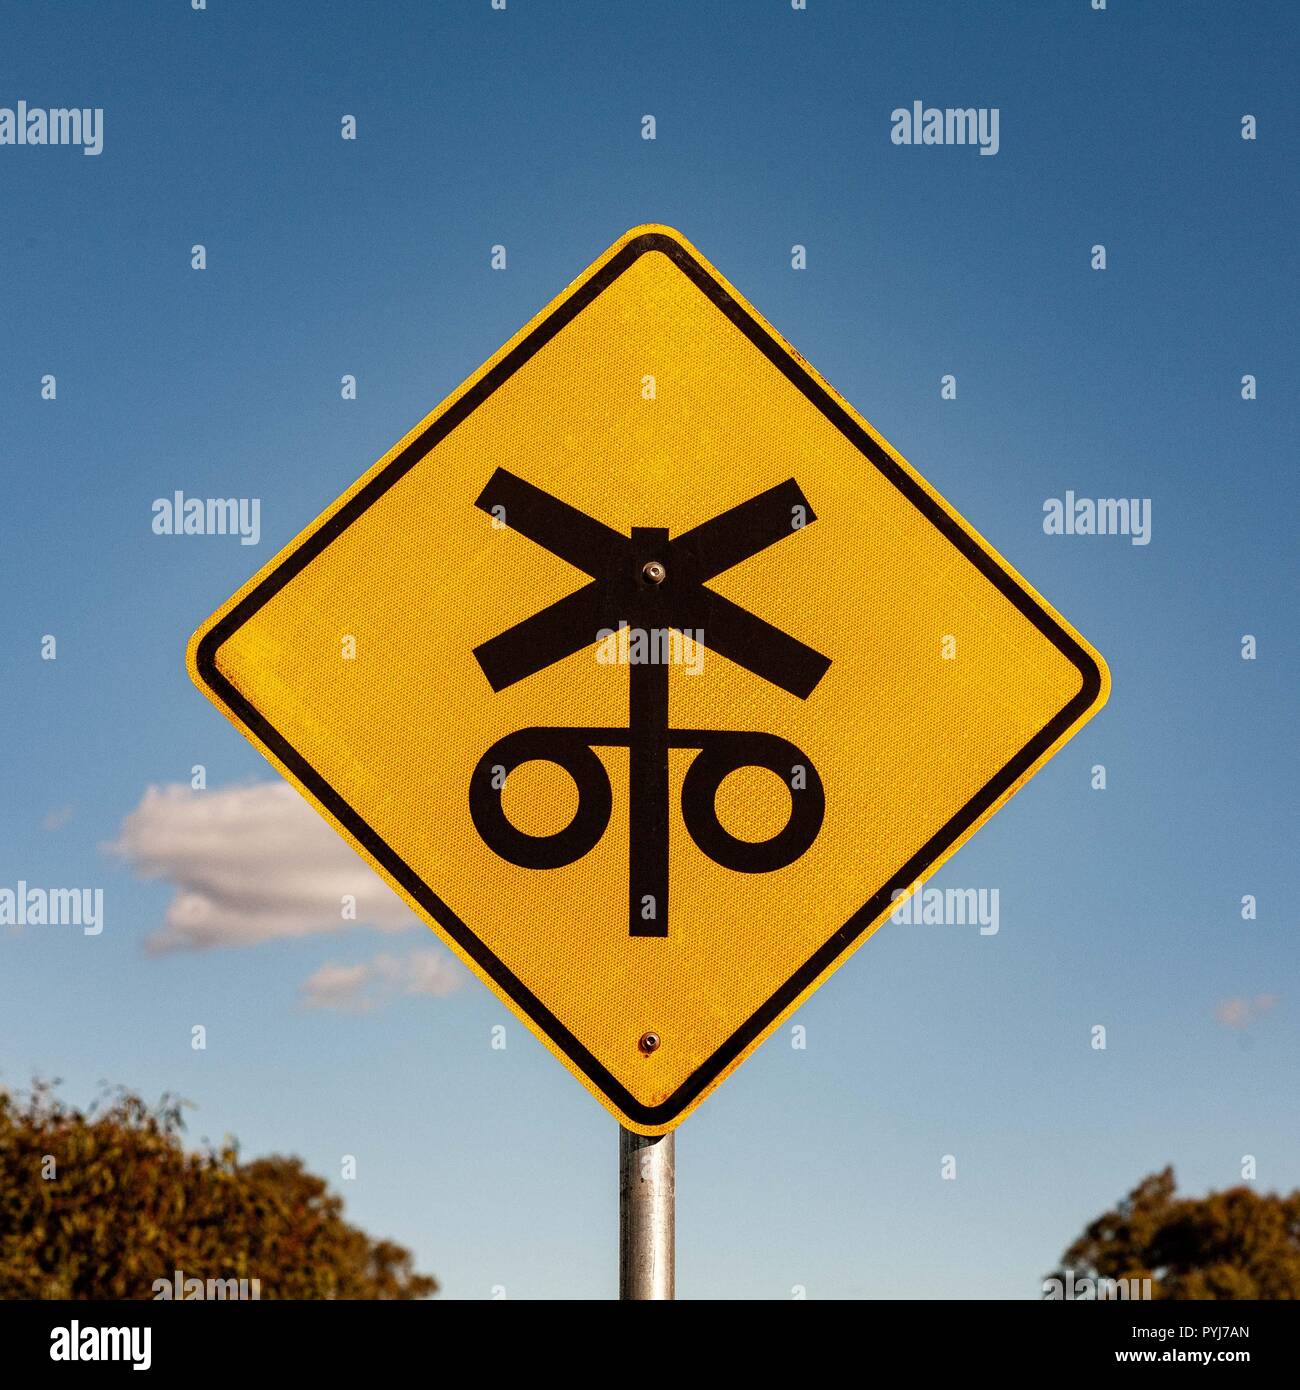 Train Or Railway Or Railroad Crossing Signs Found Along The Road On An Australian Outback Adventure Stock Photo Alamy